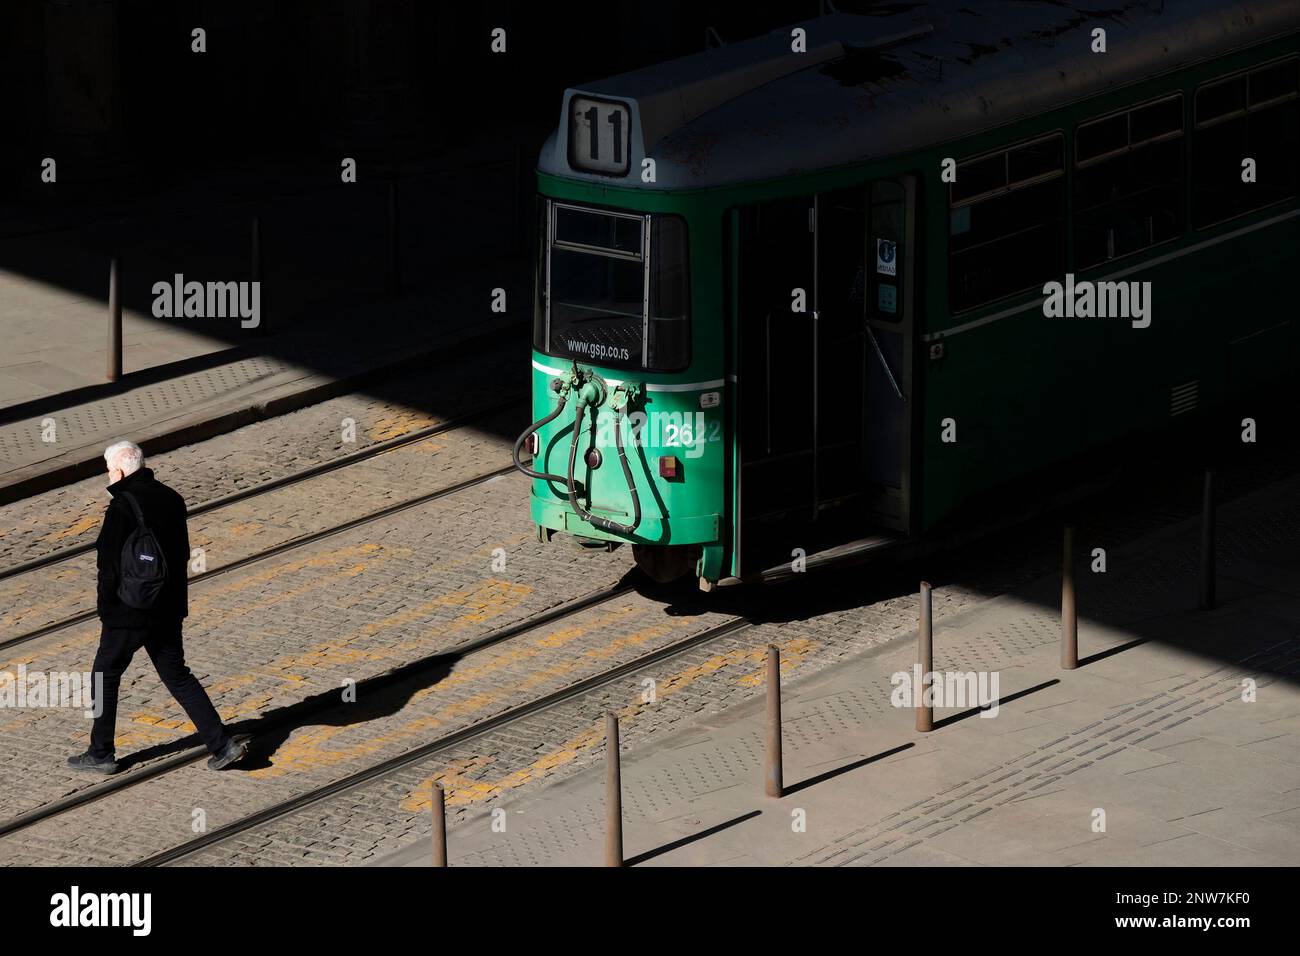 Belgrade, Serbia - February 23, 2023: Green tram number 11 standing on bus stop, and a person crossing a road behind it, high angle rear view Stock Photo